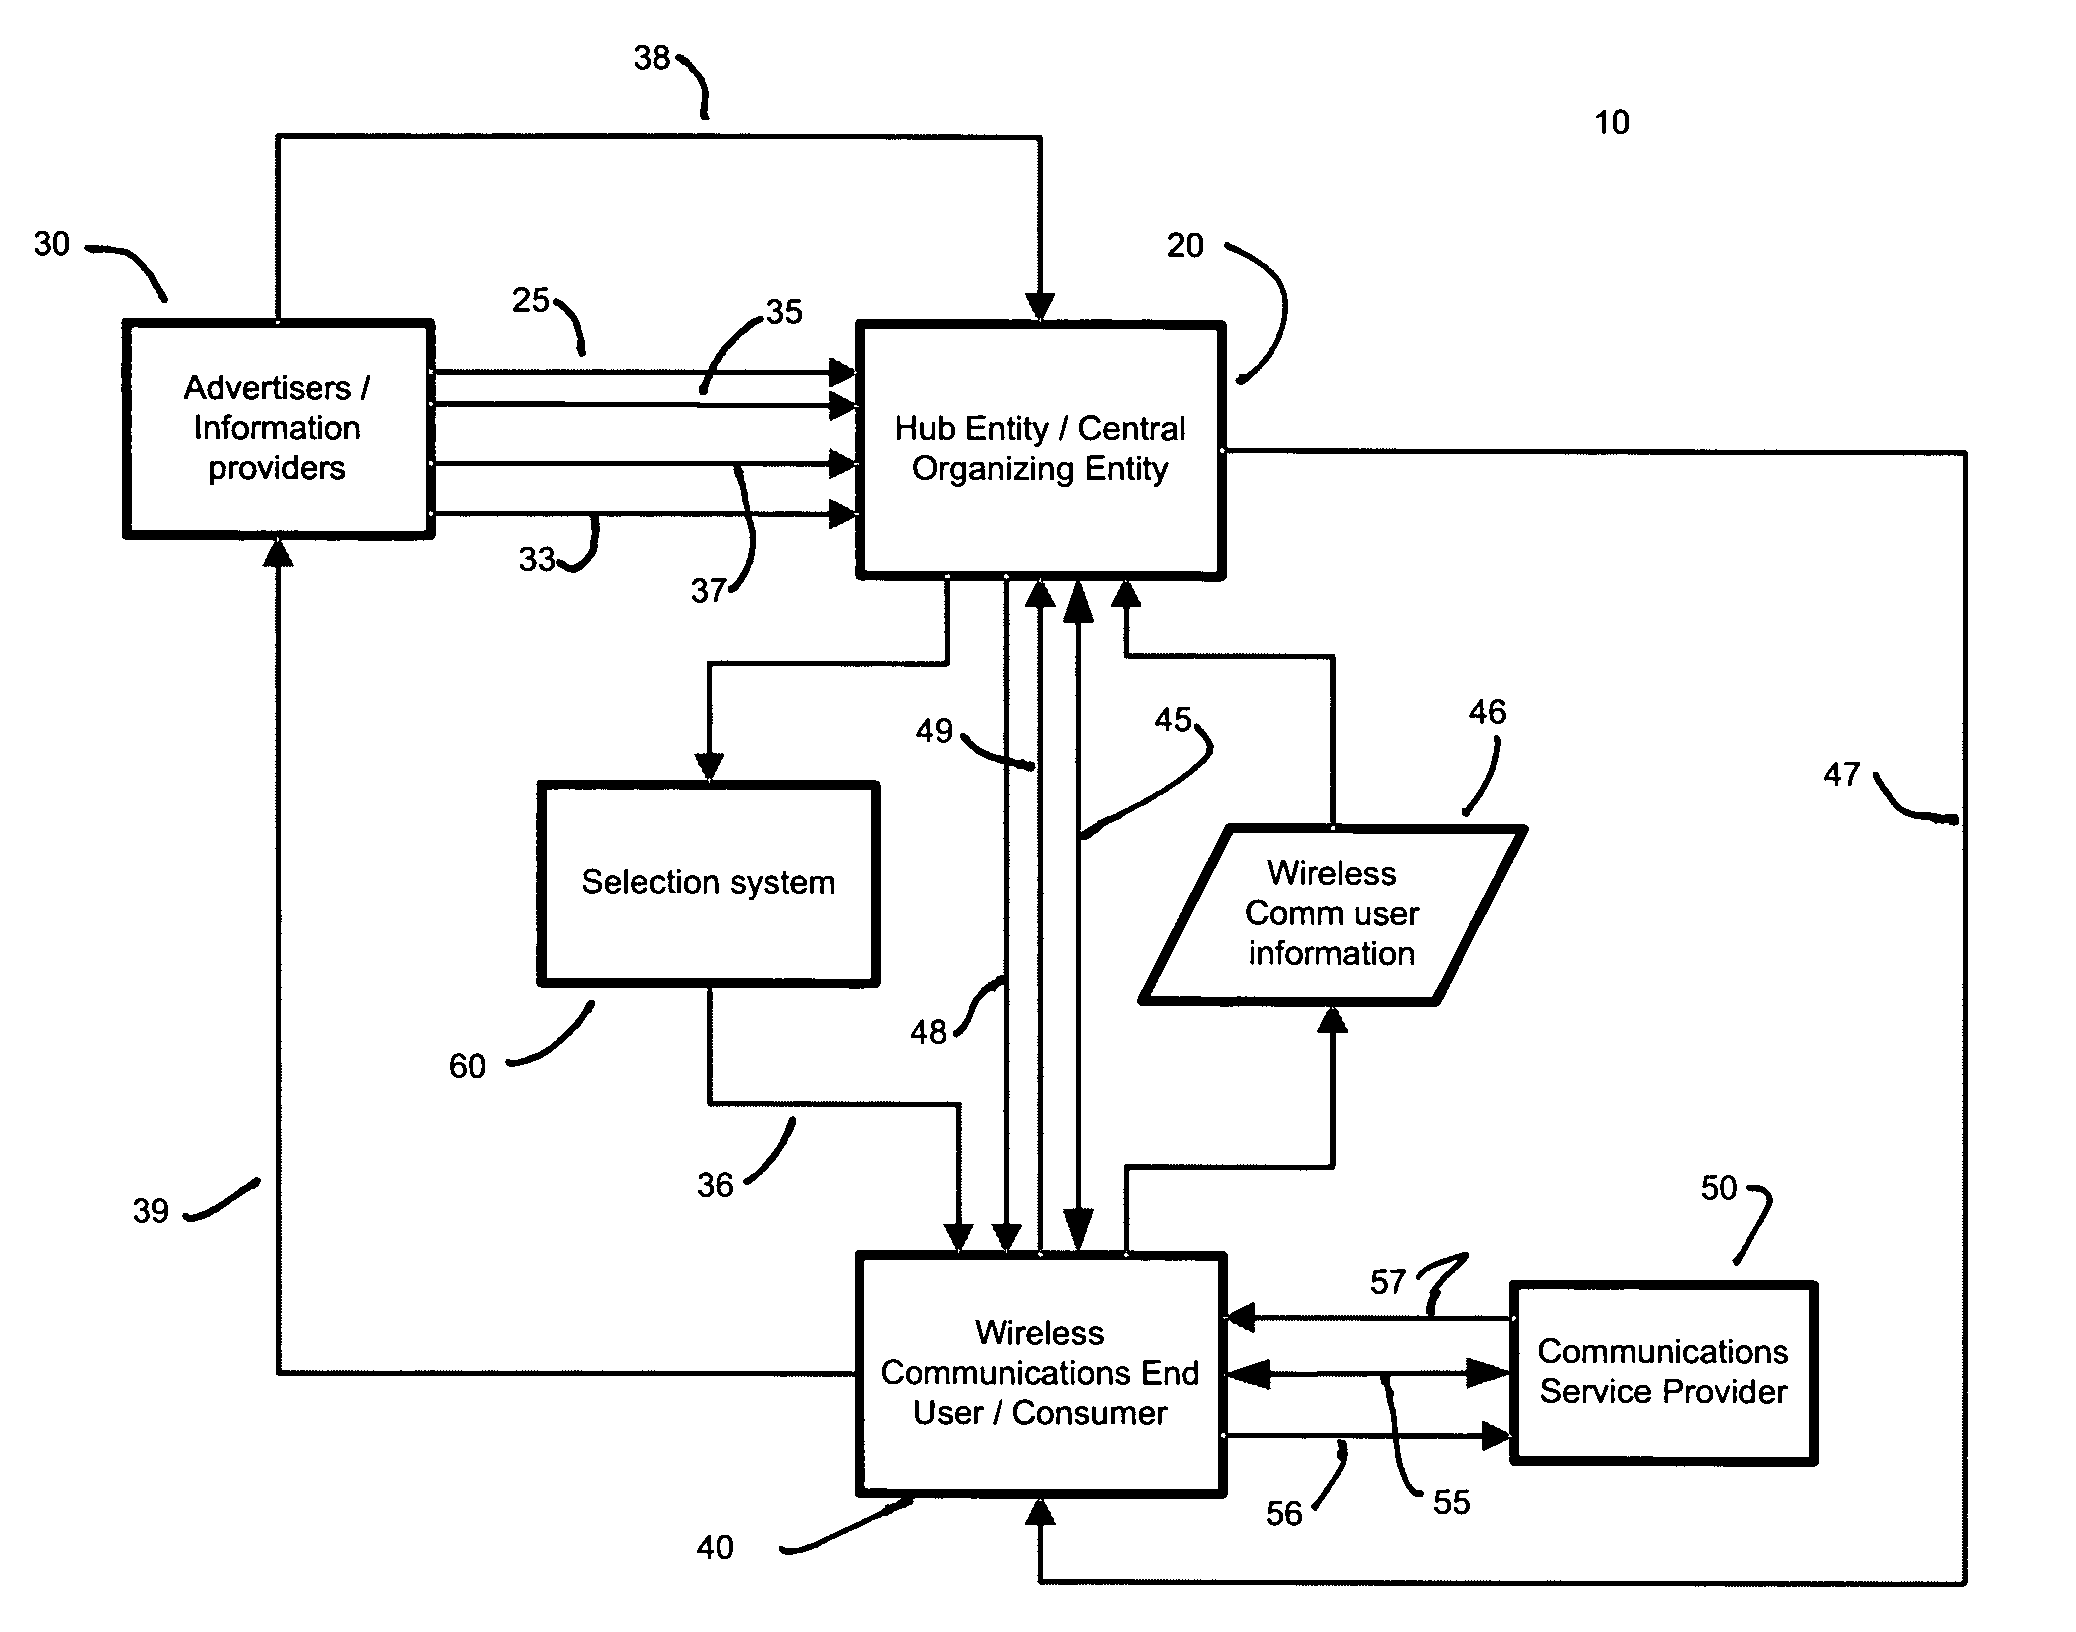 Method for directed advertising and information distribution using a wireless communications network